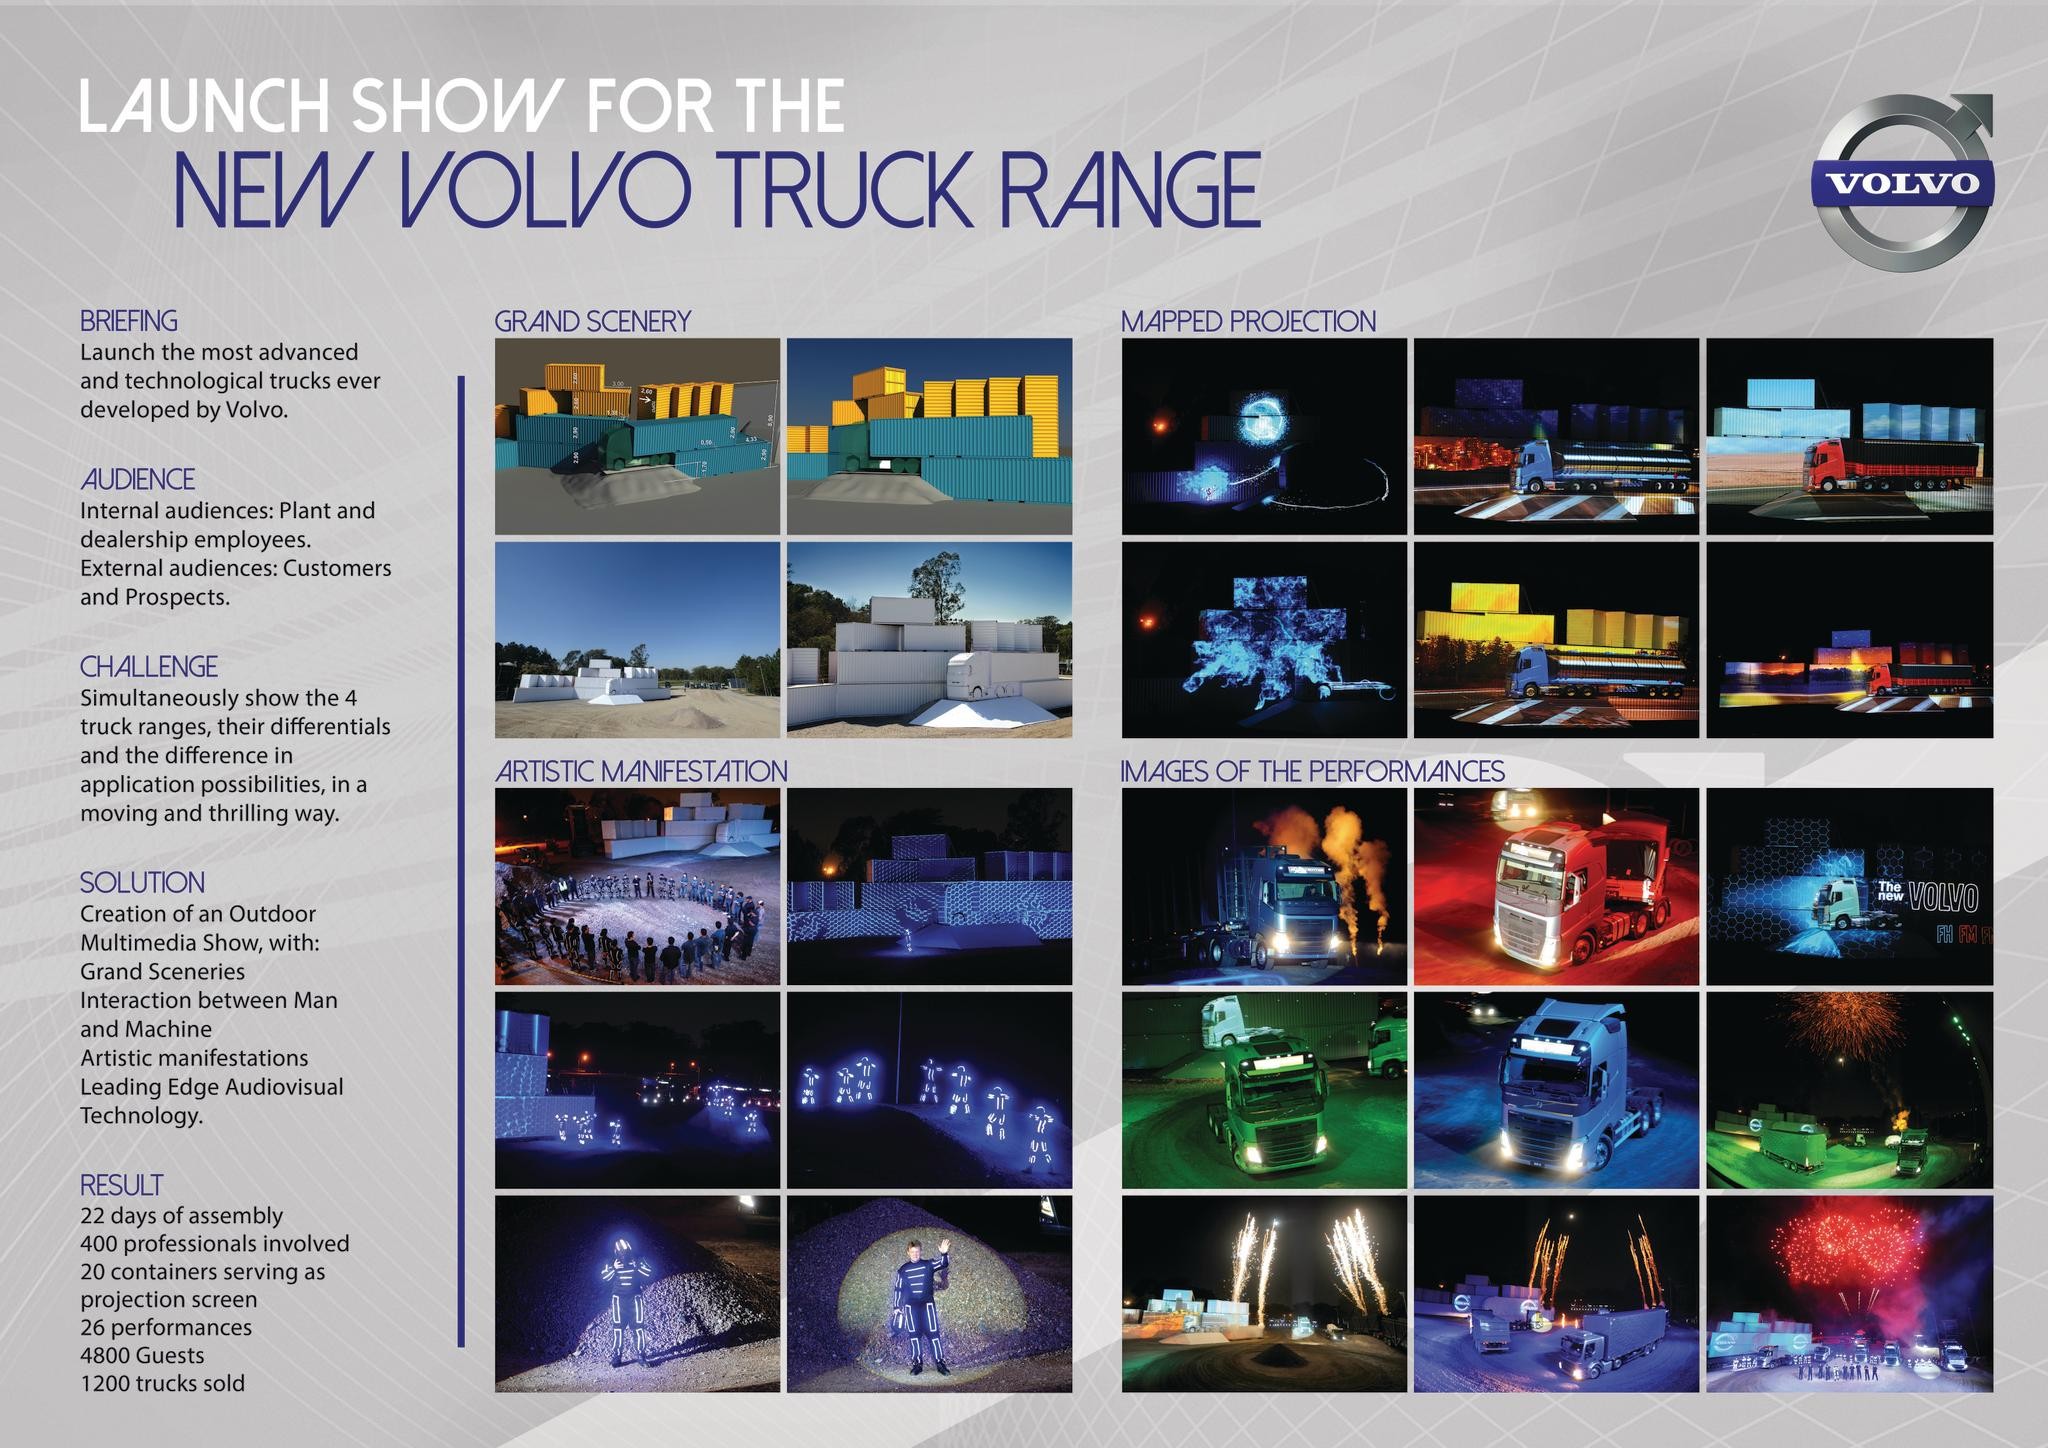 LAUNCH SHOW FOR THE NEW VOLVO TRUCK RANGE